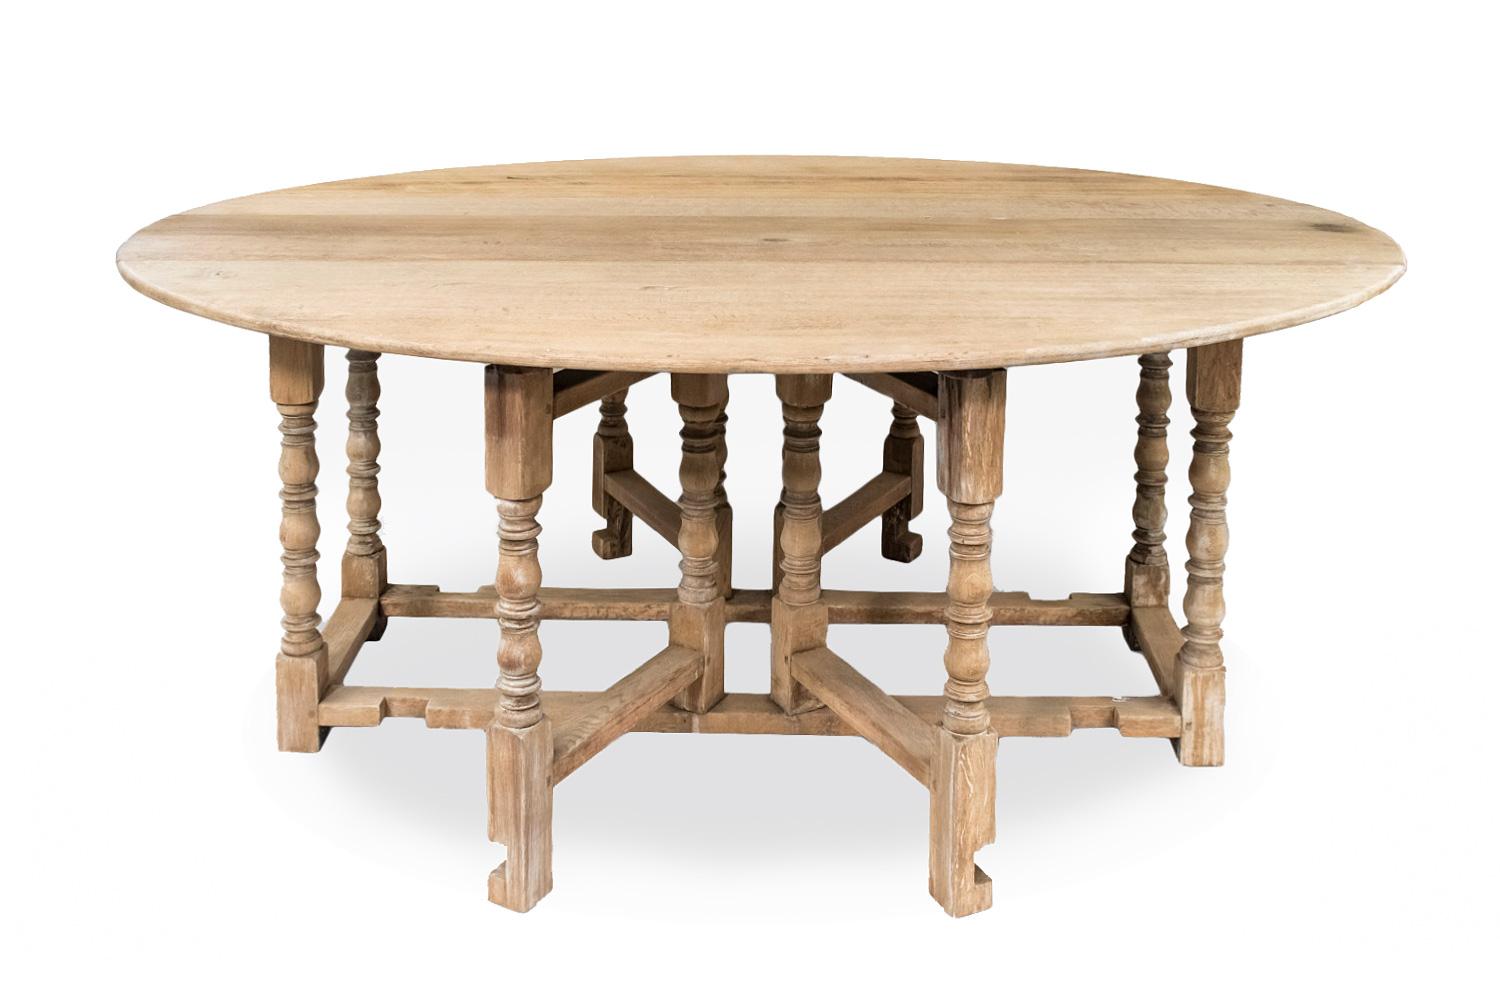 English in raw oak gateleg table standing on eight legs in baluster, discs and rectangular cubes shape : four fixed legs linked each other by four rectangular stretchers and four movable legs linked to pivots, with similar shape as the other